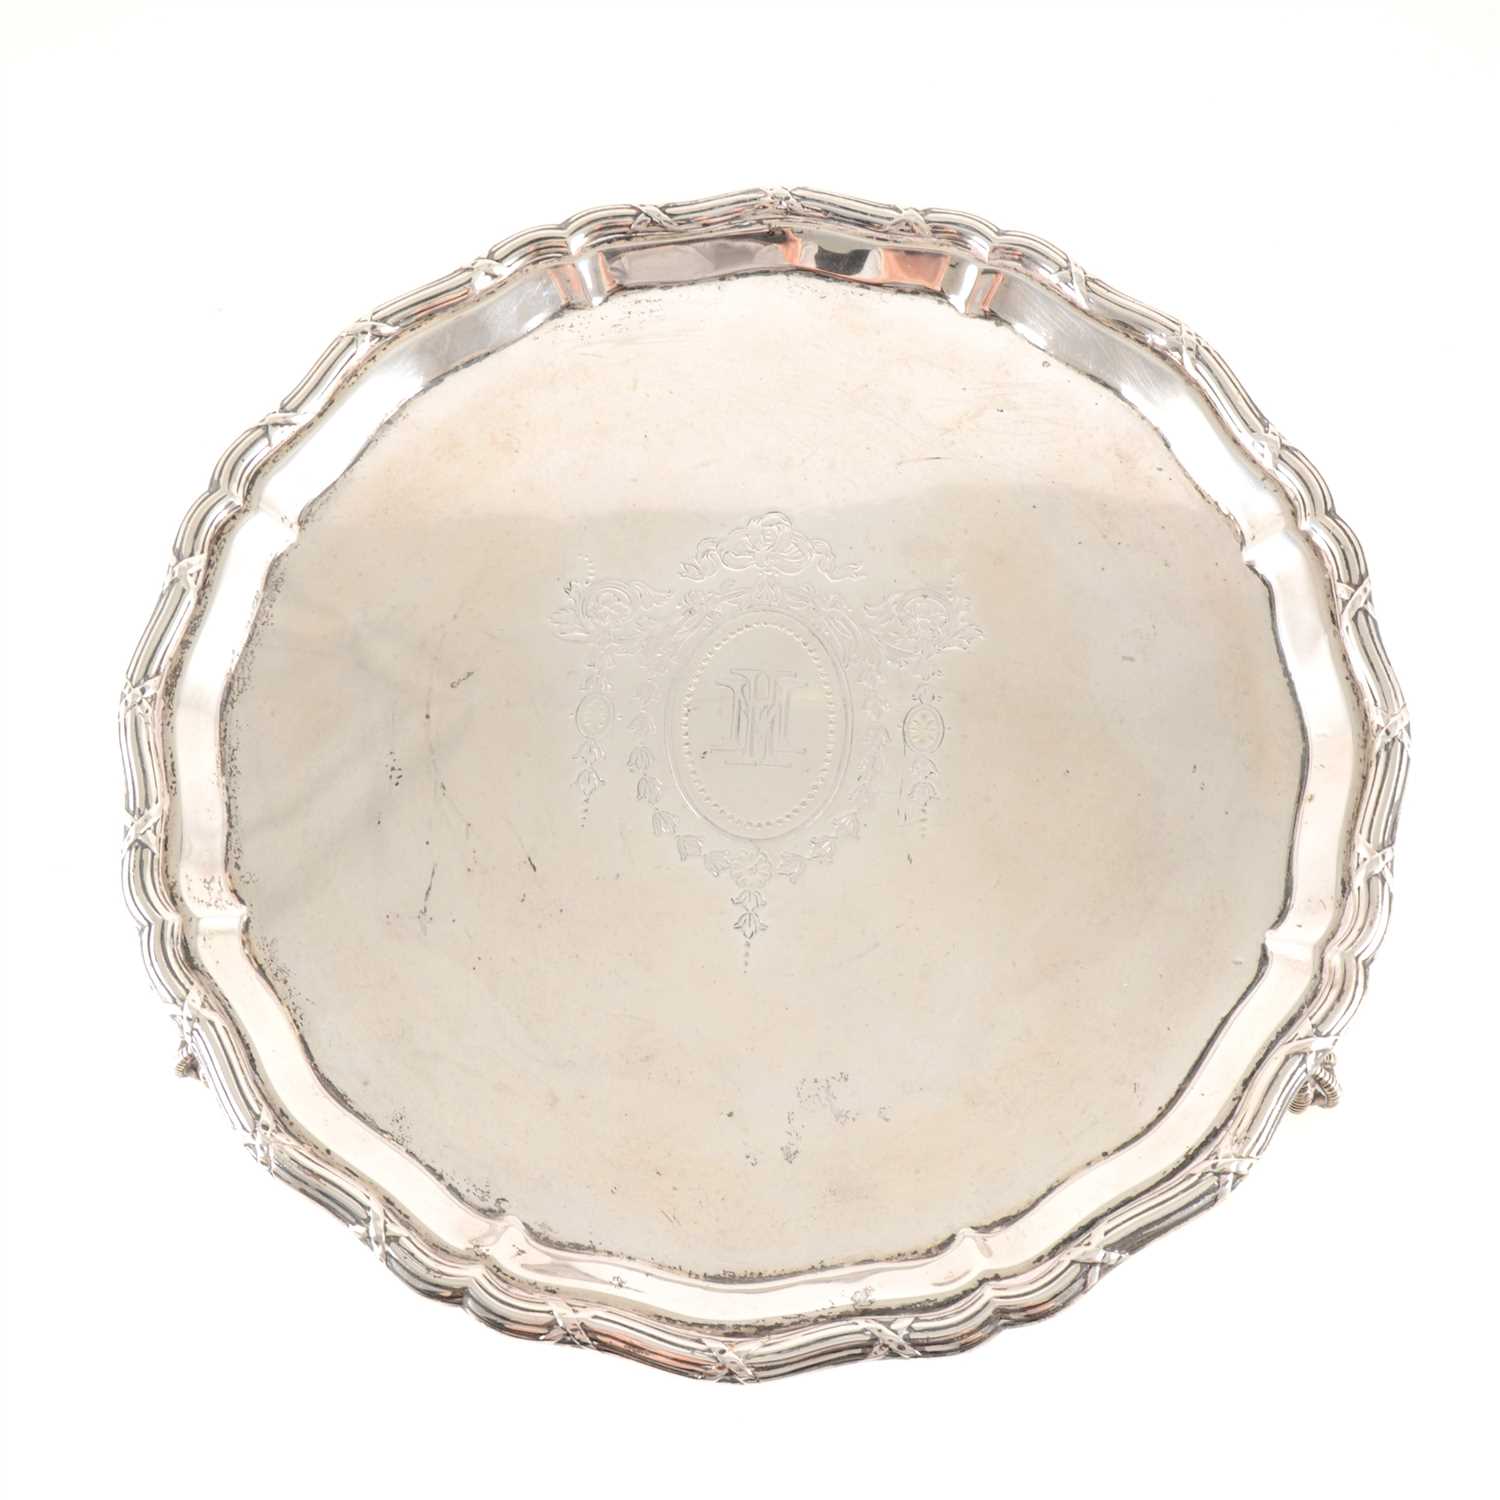 Lot 193 - A silver salver by Mappin & Webb, Sheffield 1926, moulded pie-crust and reeded edge, engraved monogram within a cartouche, raised on talon and ball feet, diameter 26cm, weight approx. 13oz.